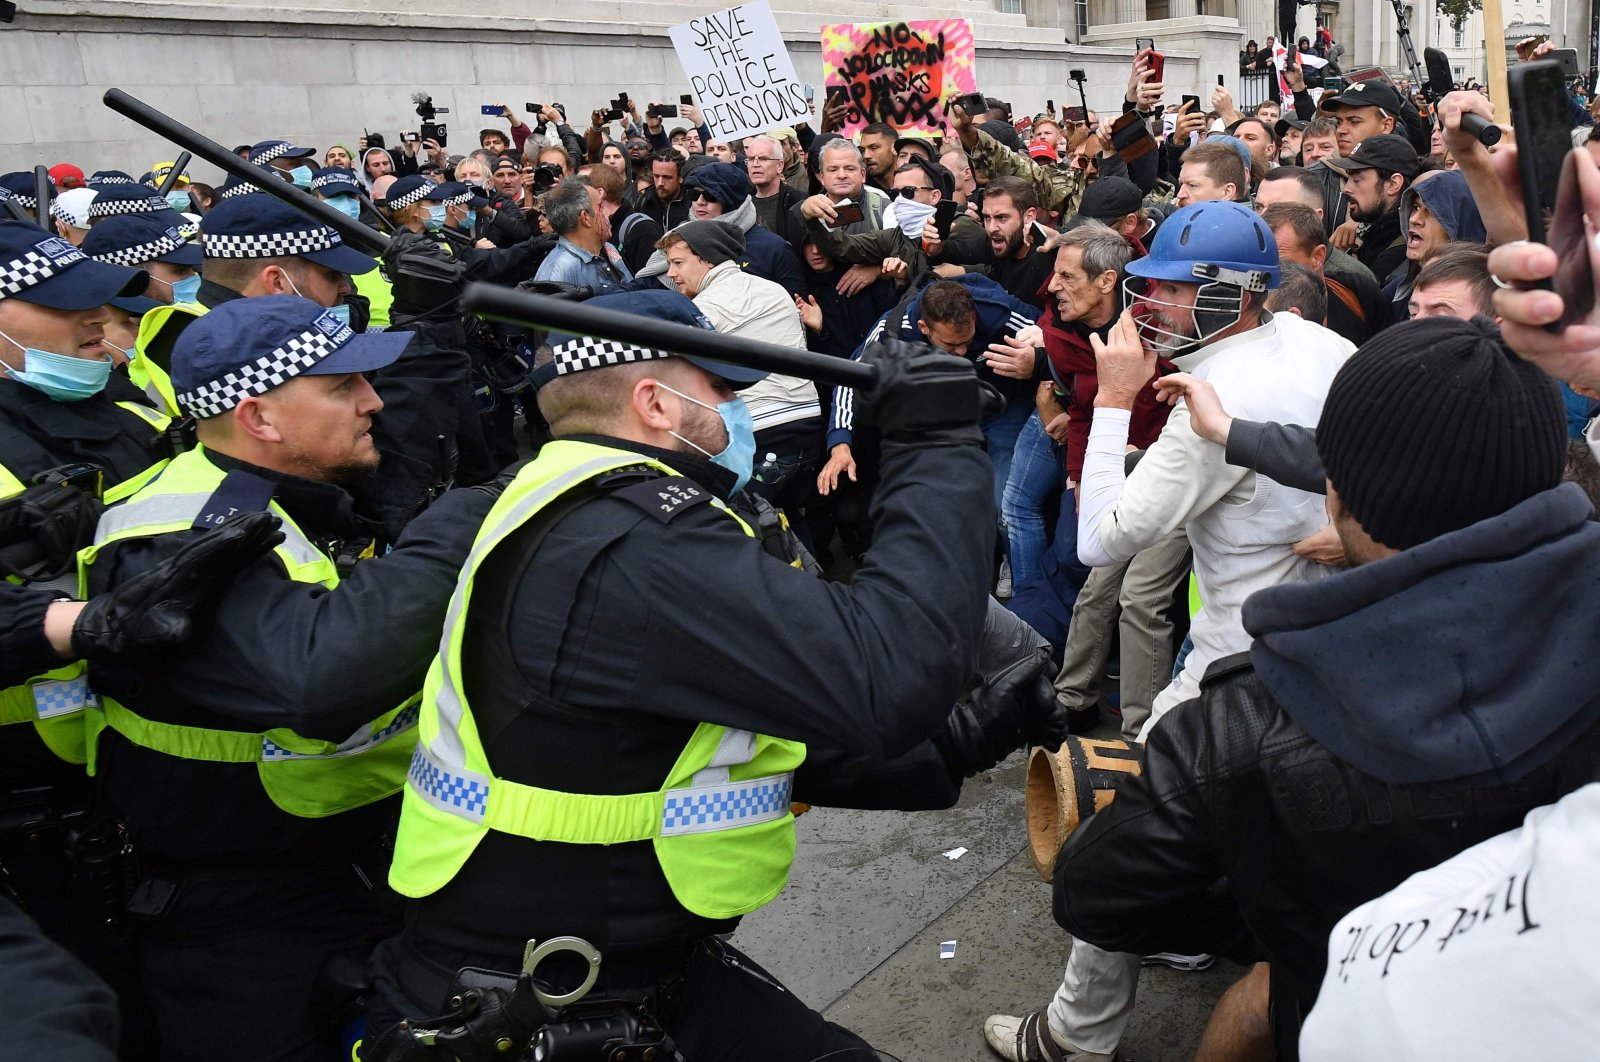 London Police move in to disperse protesters at a 'We Do Not Consent!' mass rally against vaccination and government restrictions designed to fight the spread of the novel coronavirus, including the wearing of masks and taking tests for the virus  in Trafalgar Square, London, Sept. 26, 2020, (AFP Photo)